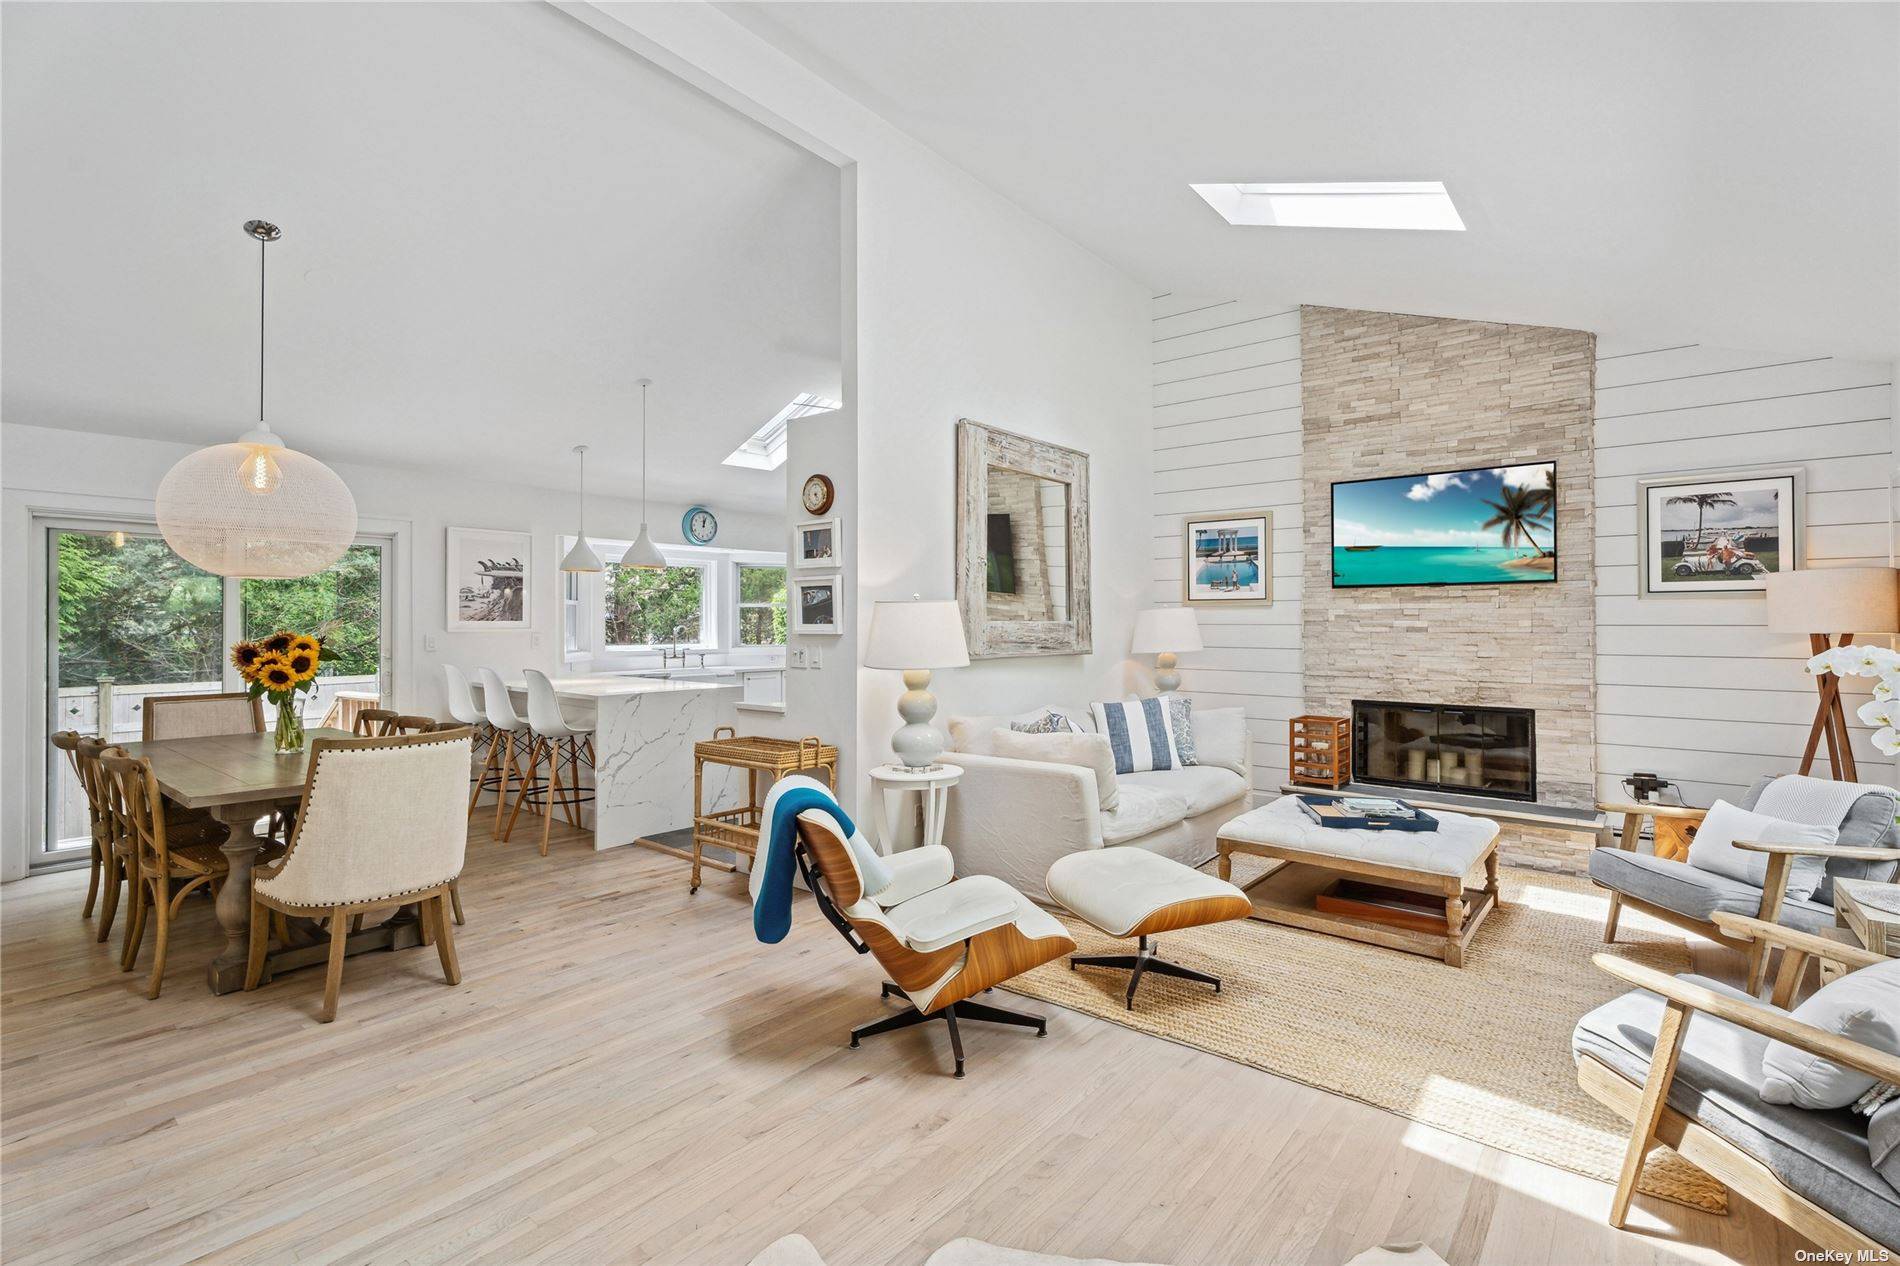 Down a long private driveway sits this secluded and charming Westhampton Beach Village Summer rental home that has been completely renovated with a Contemporary flair and style.